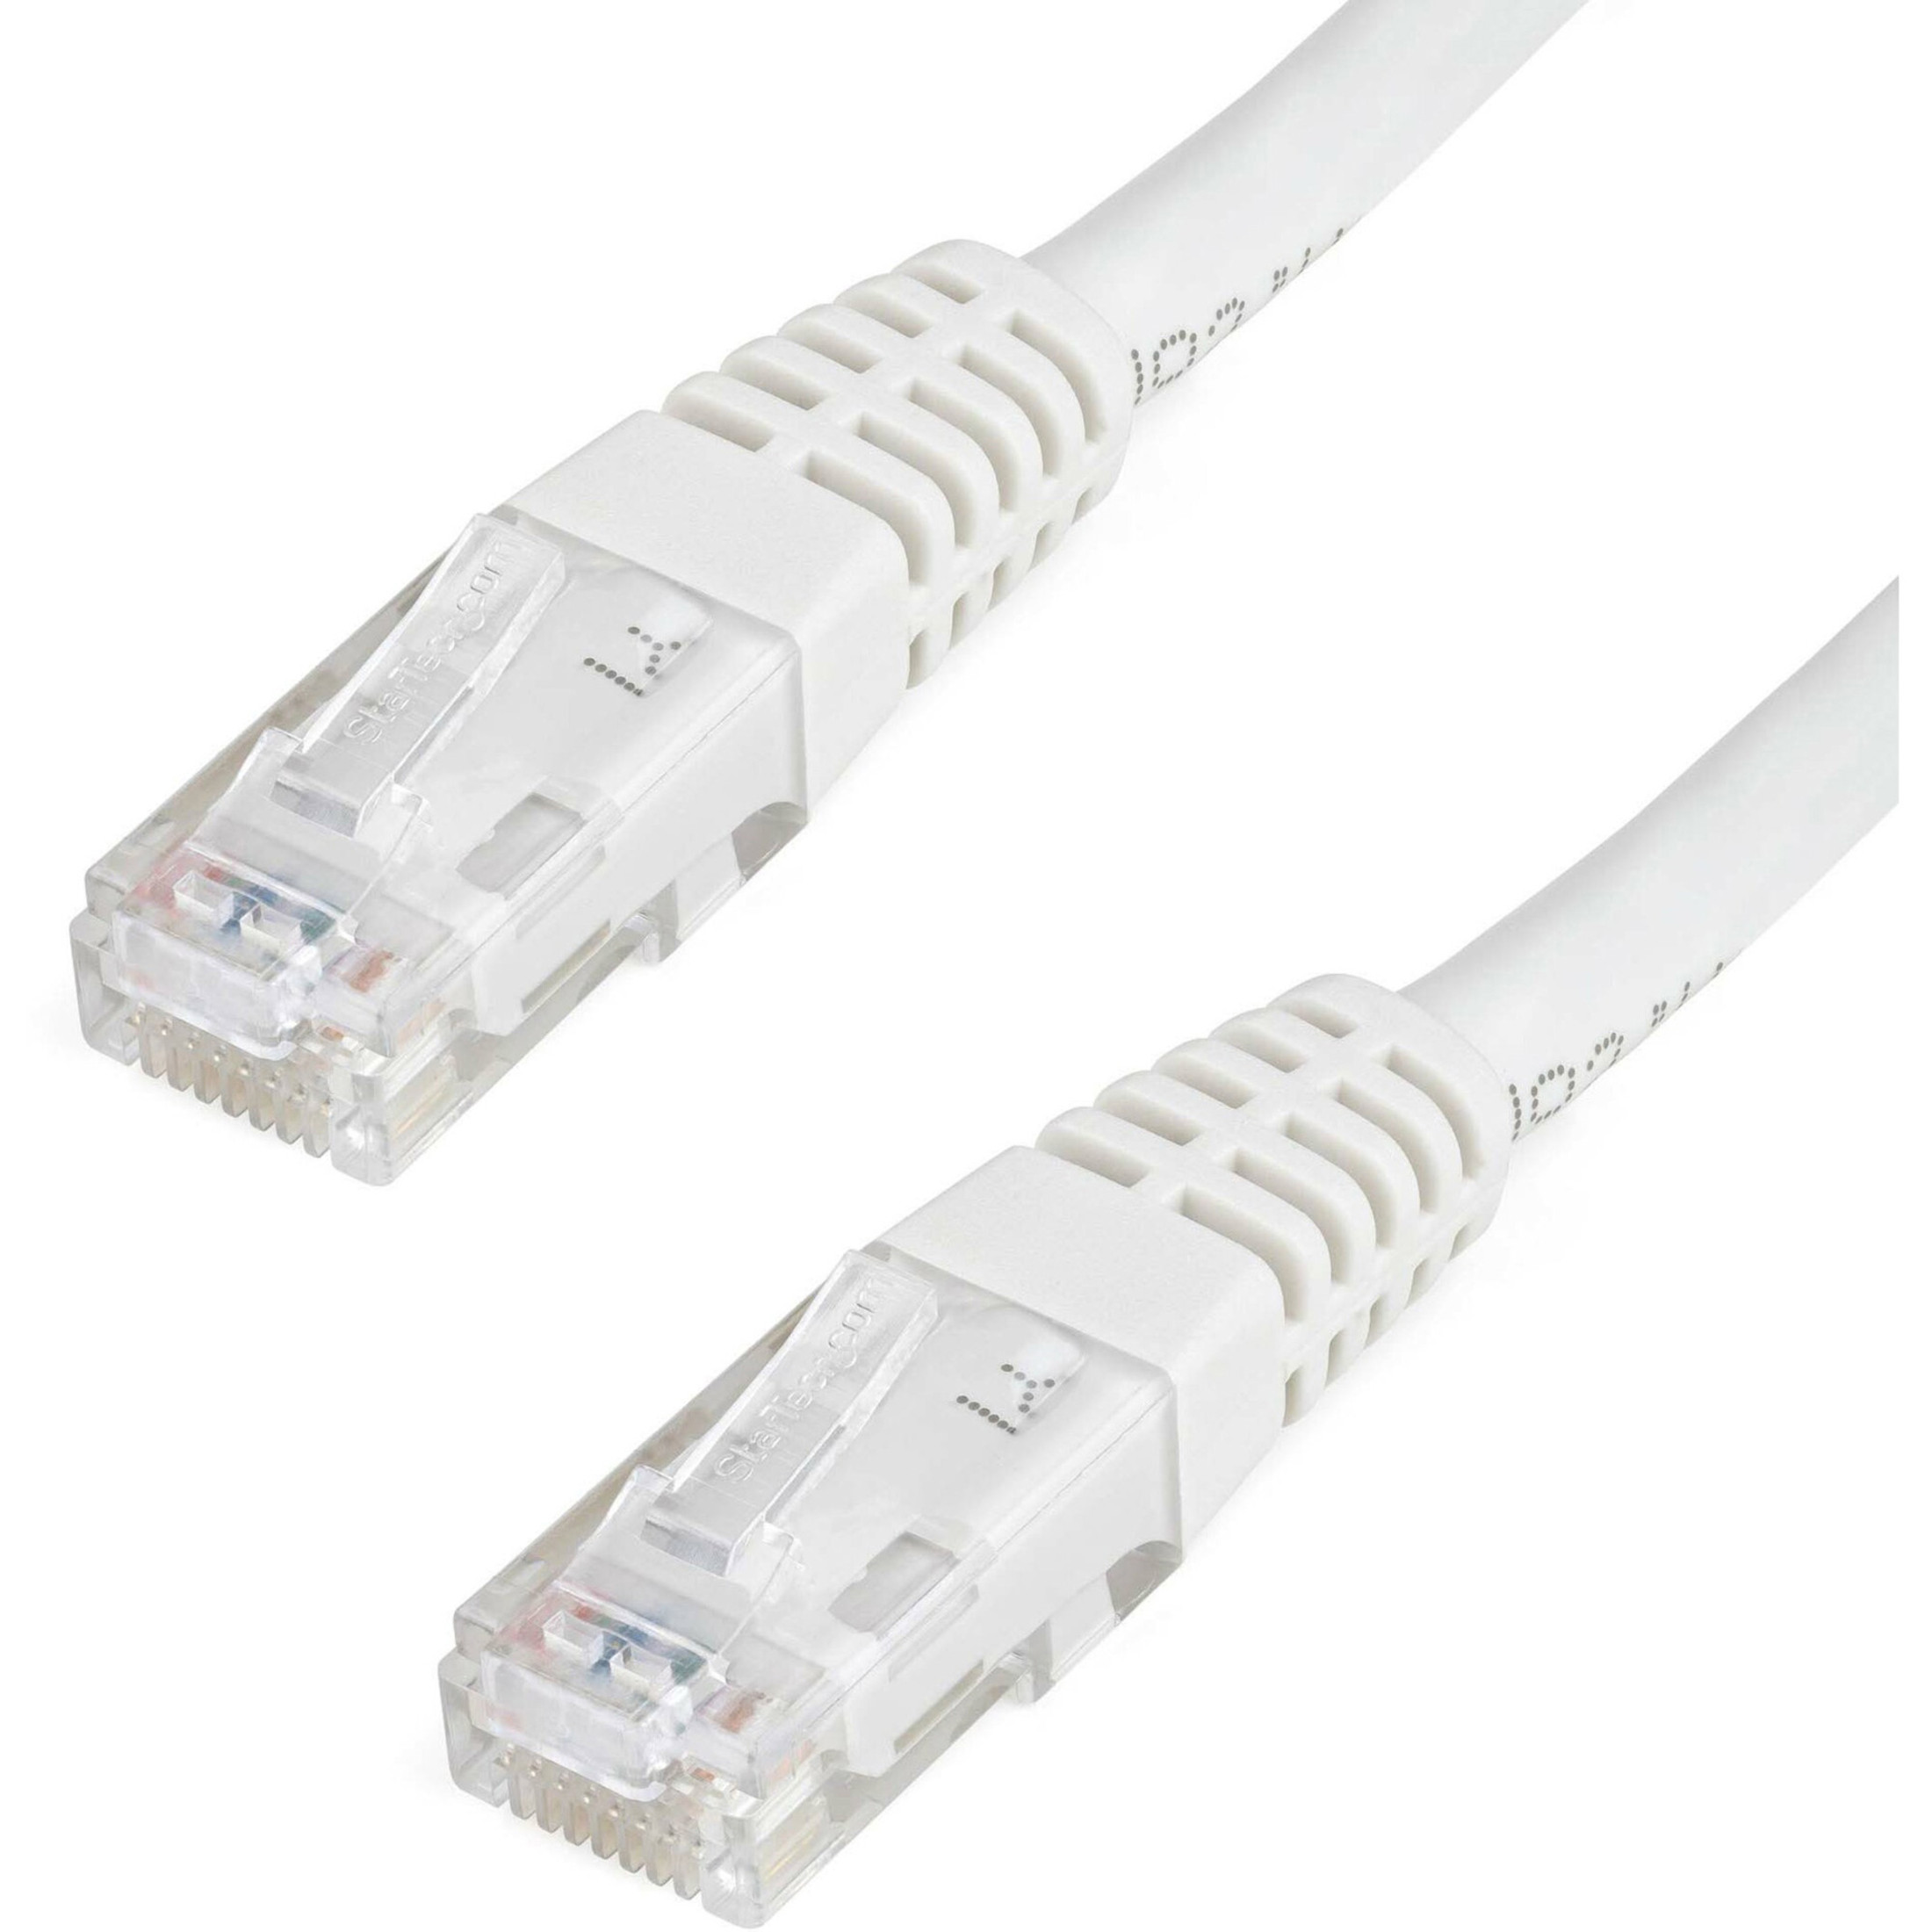 Startech .com 25ft CAT6 Ethernet CableWhite Molded Gigabit100W PoE UTP 650MHzCategory 6 Patch Cord UL Certified Wiring/TIA25ft Wh… C6PATCH25WH